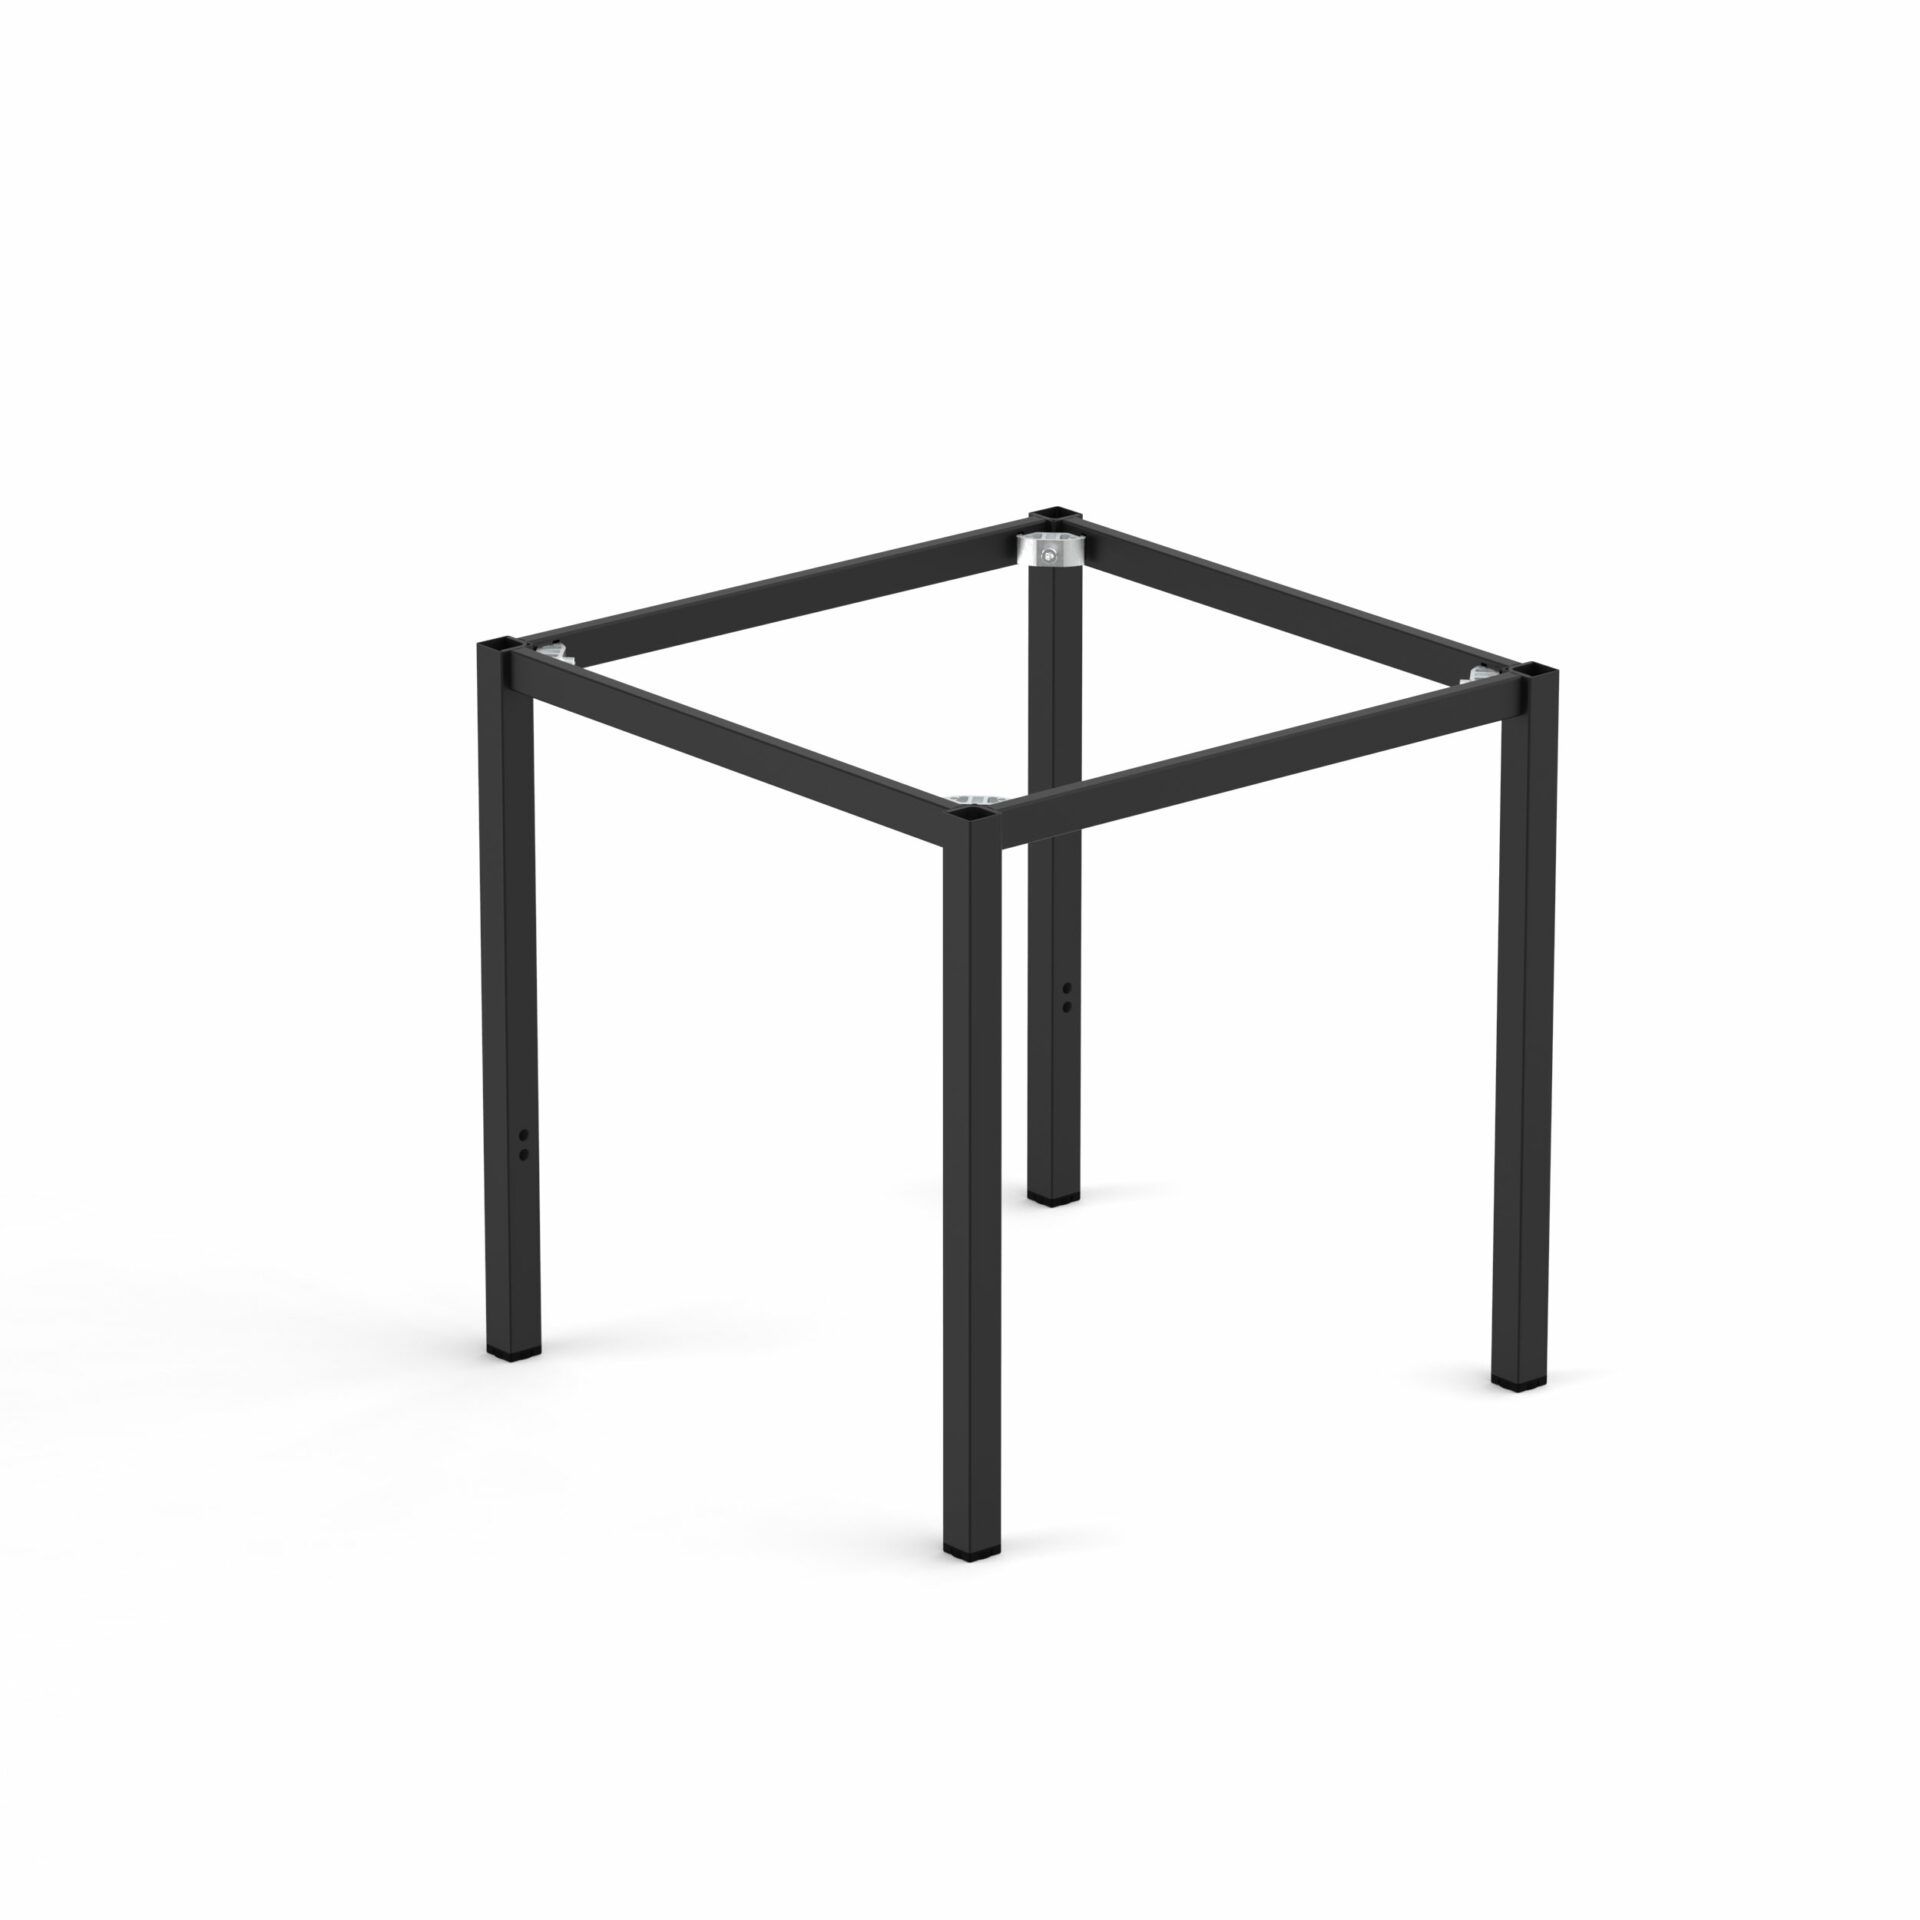 Spire Square leg Table Height Frame 990 x 690 x 720H